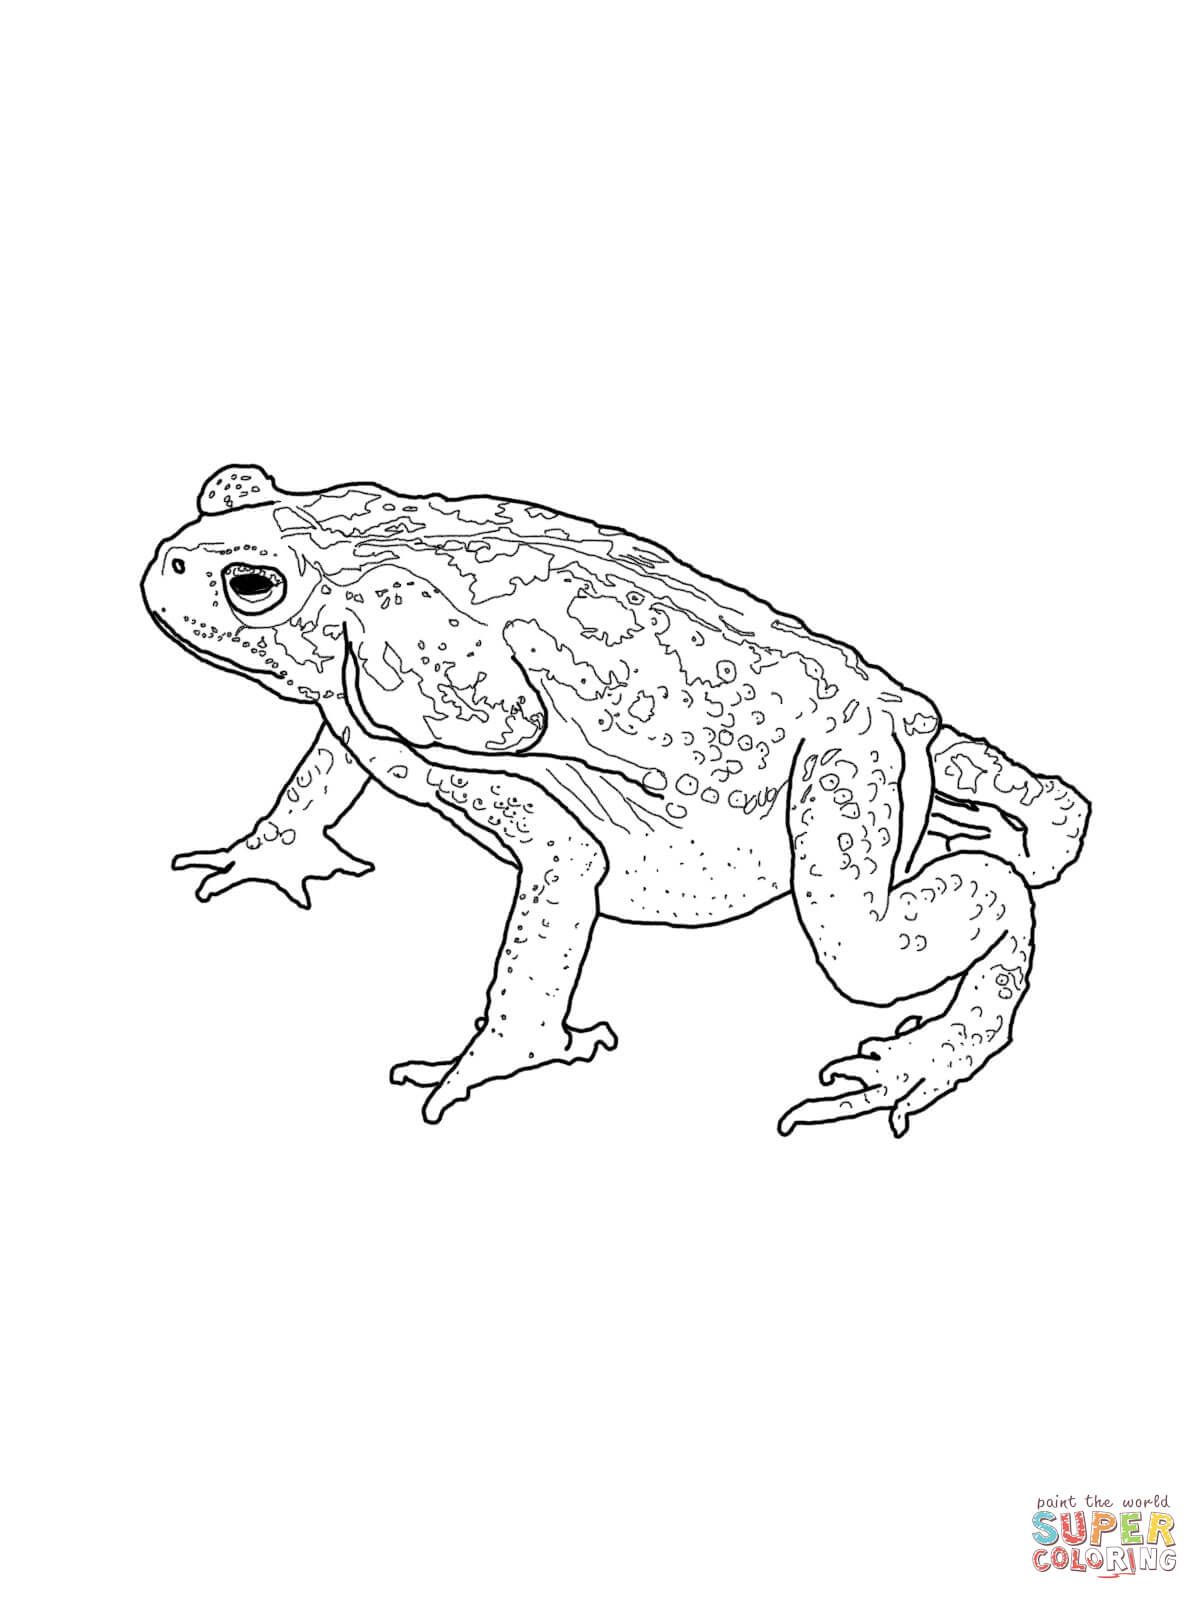 Cane Toad coloring #4, Download drawings